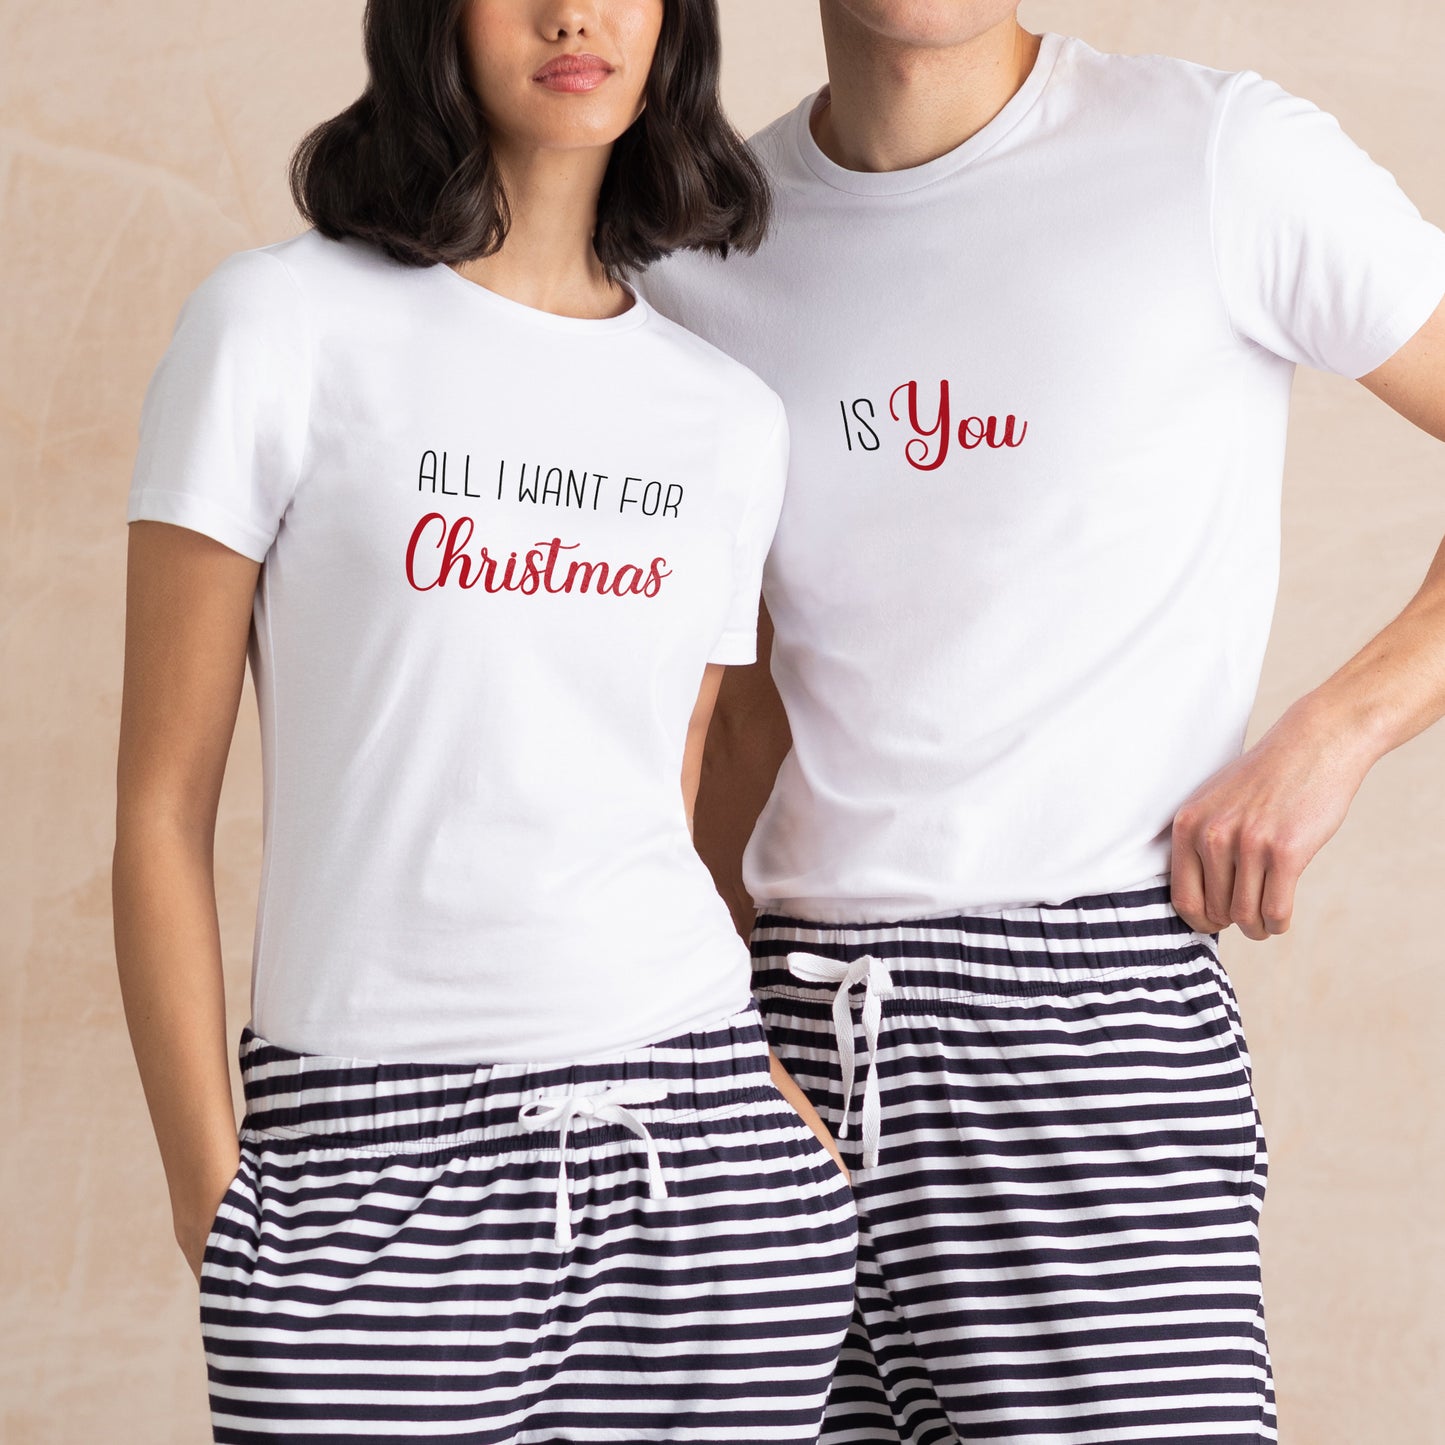 Matching PJs For Couples